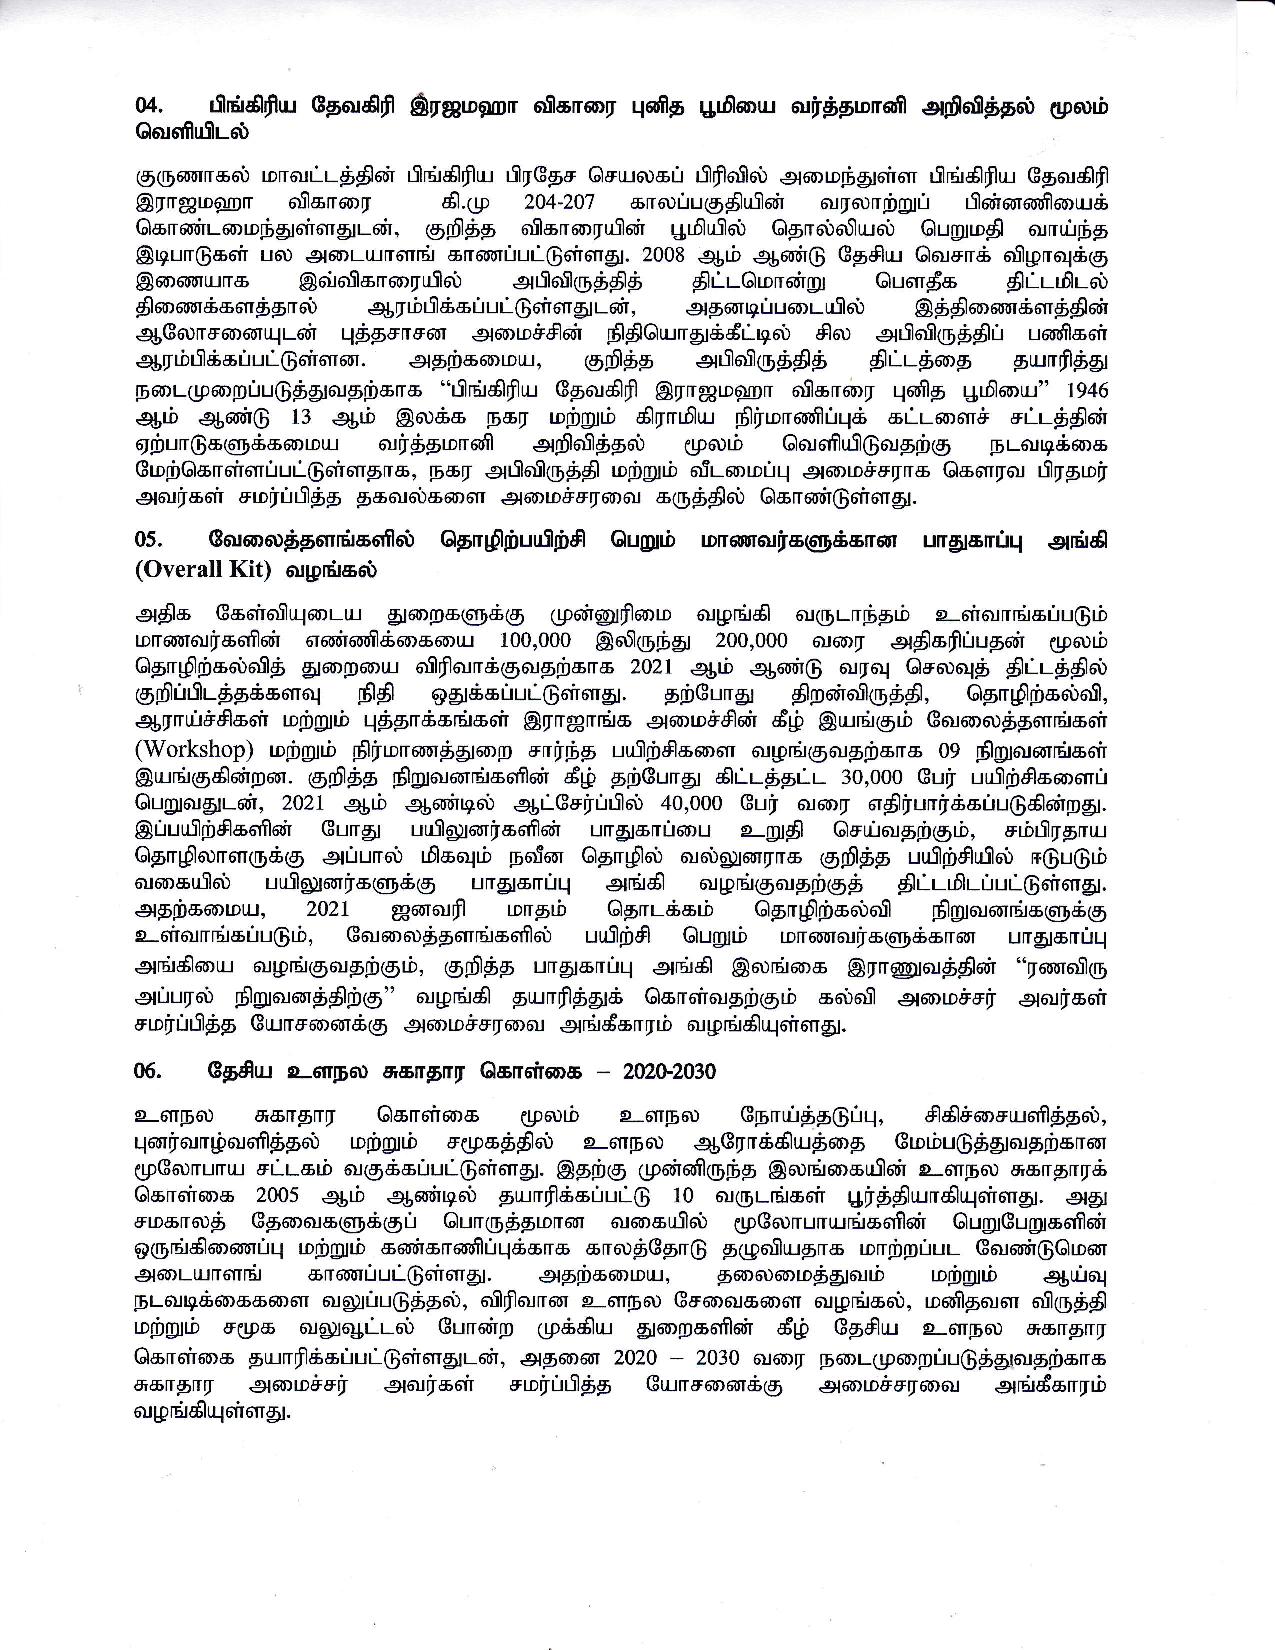 Cabinet Decision on 21.12.2020 Tamil page 002